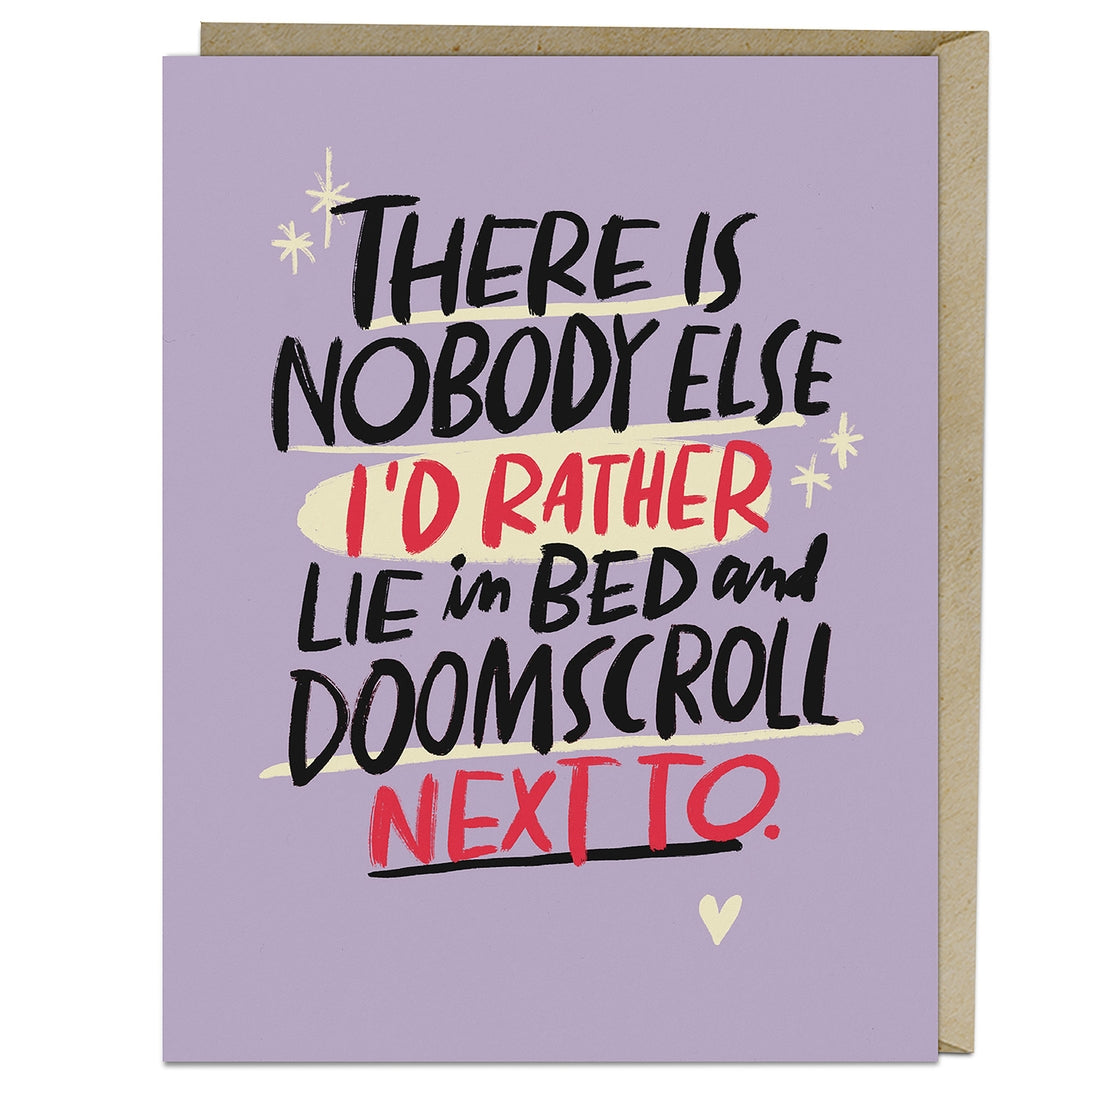 Emily McDowell Hand Illustrated Card reading "there is nobody else i'd rather lie in bed and doomscroll next to"